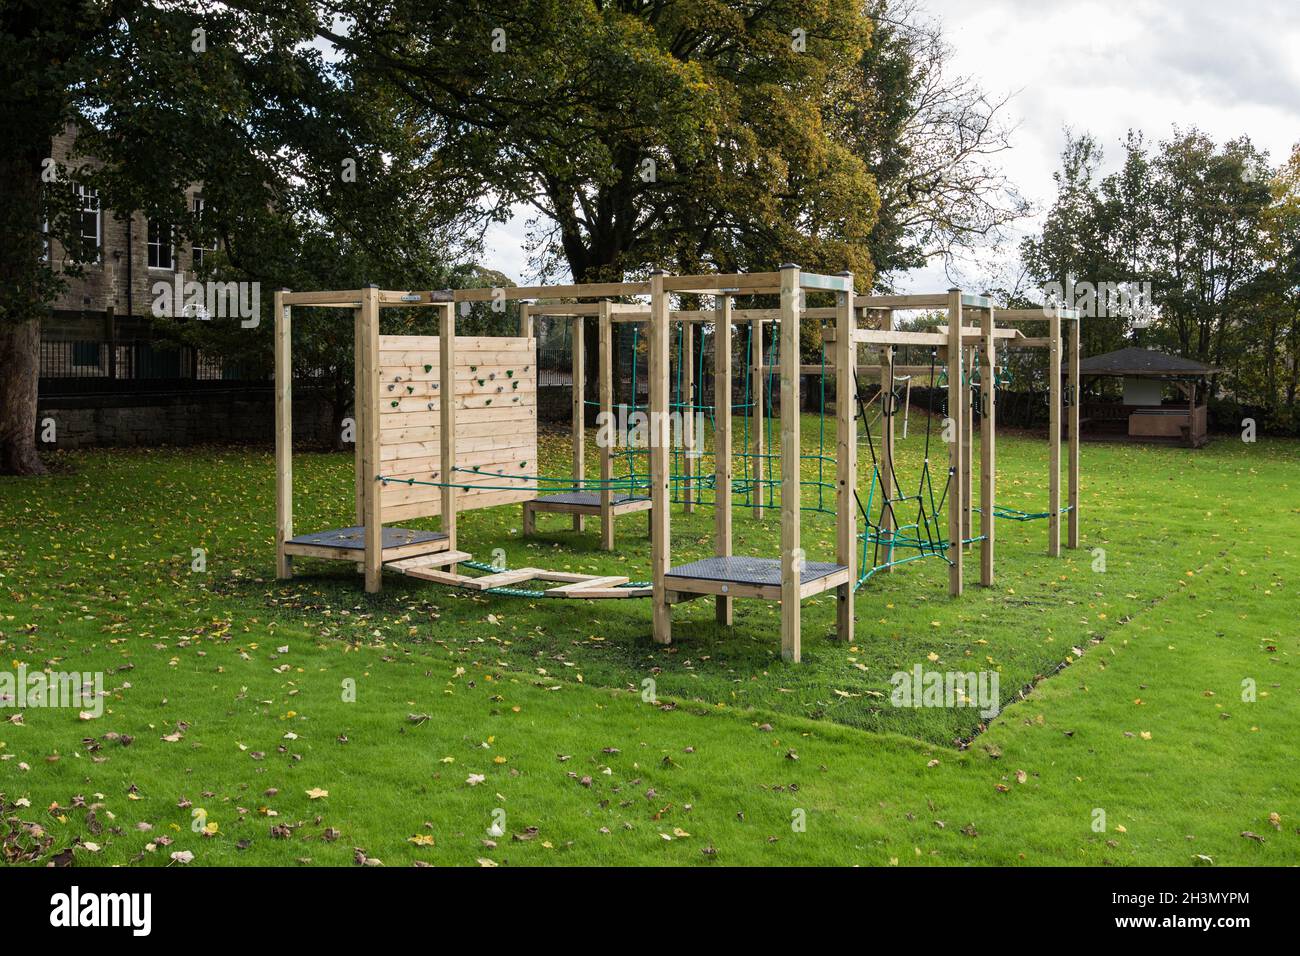 The finished job at Long Preston Endowed school, where new outdoor play equipment has been recently installed (late October 2021) Stock Photo